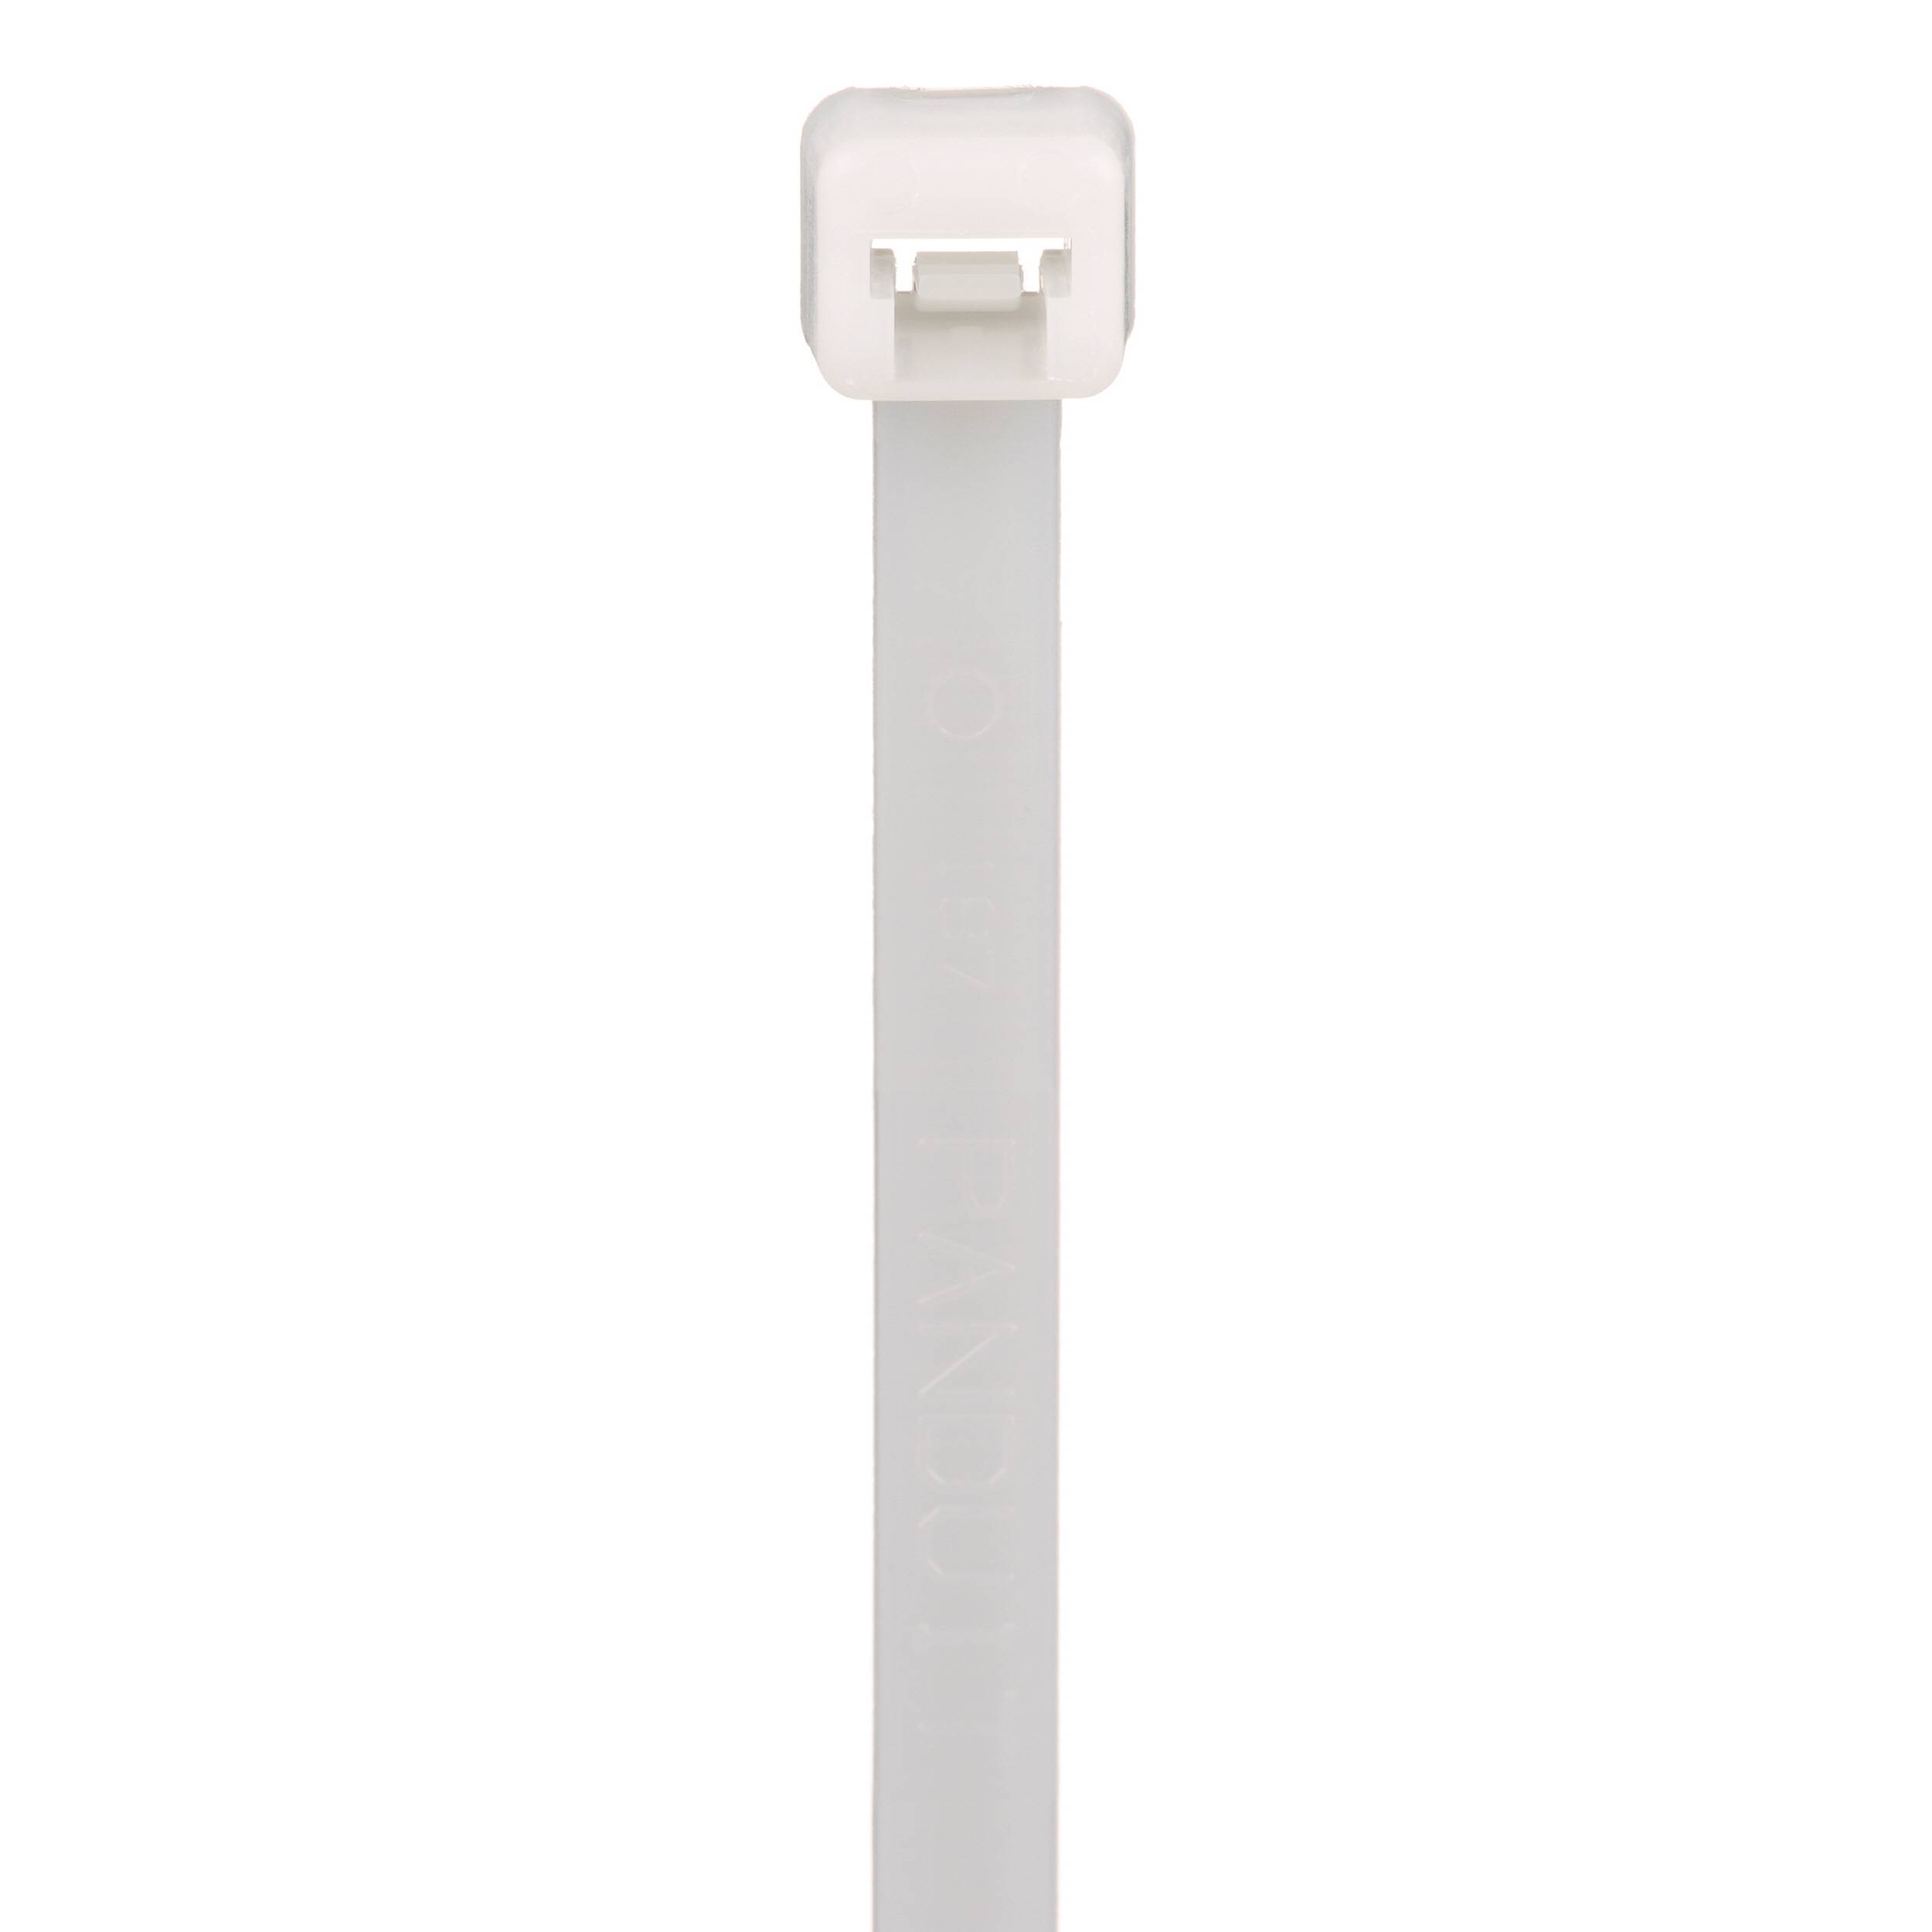 Panduit® Pan-Ty® PLT4S-C PLT Cross Section Standard Plenum Rated Cable Tie, 14-1/2 in L x 0.34 in W x 0.06 in THK, Nylon 6.6, Natural